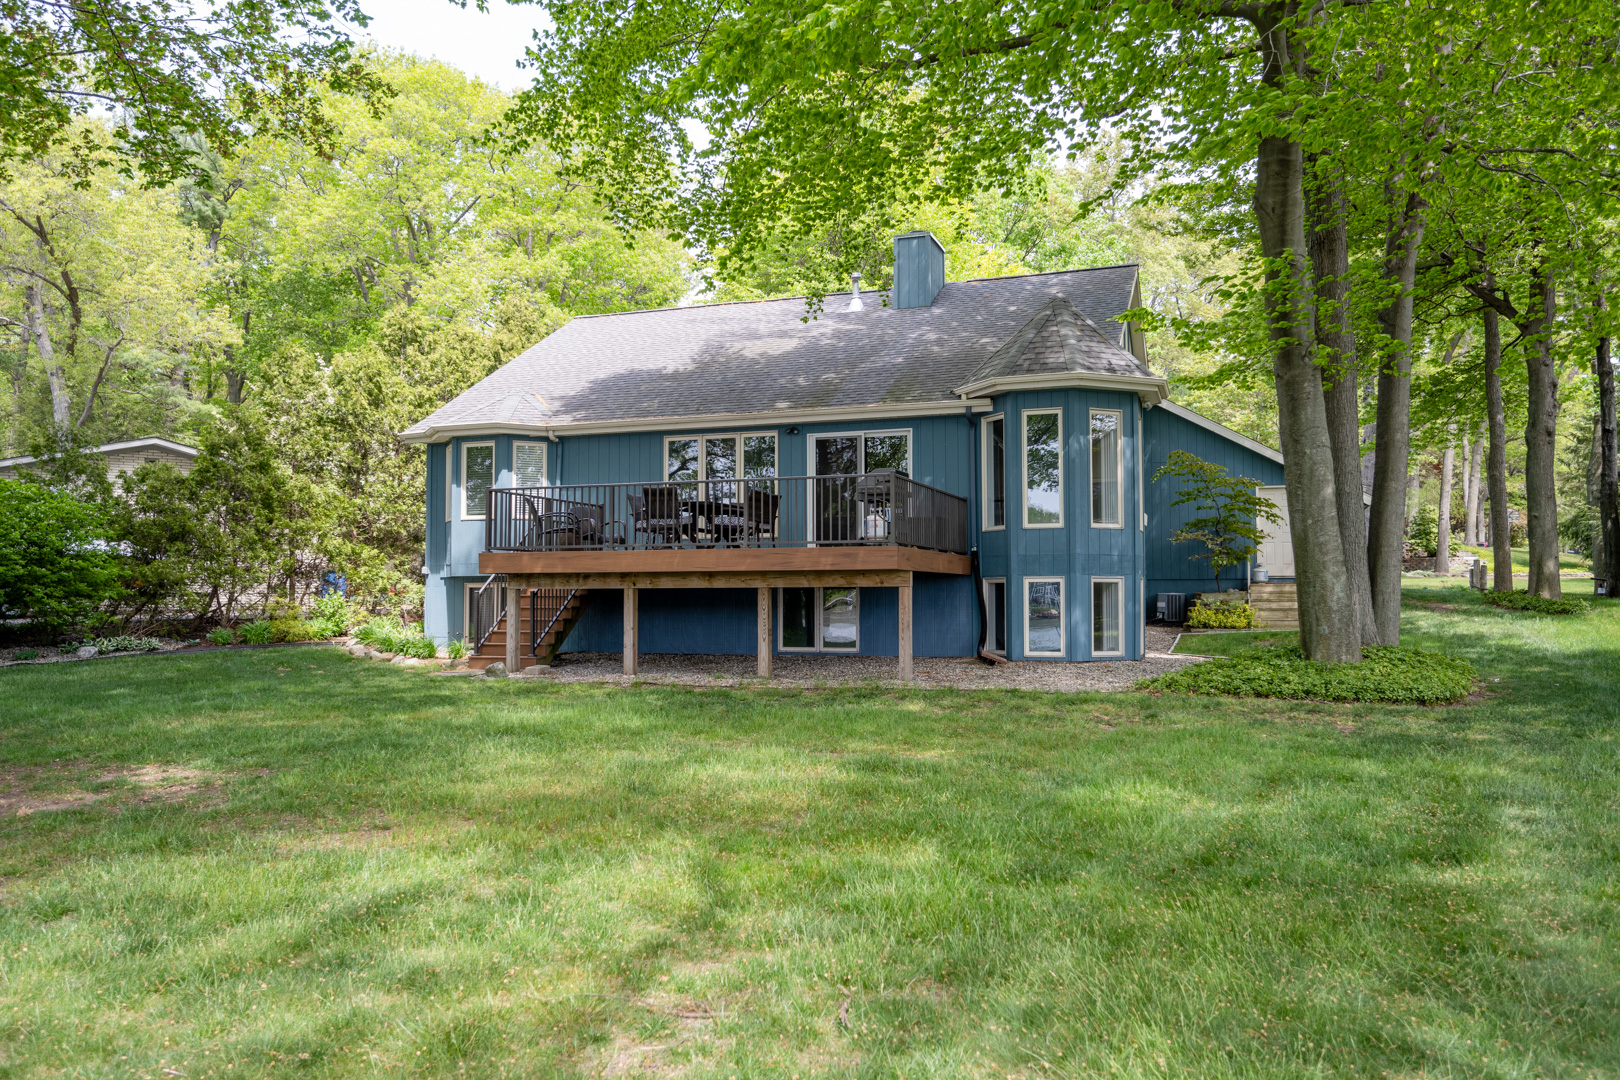 This three bedroom vacation rental overlooks Lake Macatawa and is within driving/biking distance of the Holland State Park and Tunnel Park beaches.